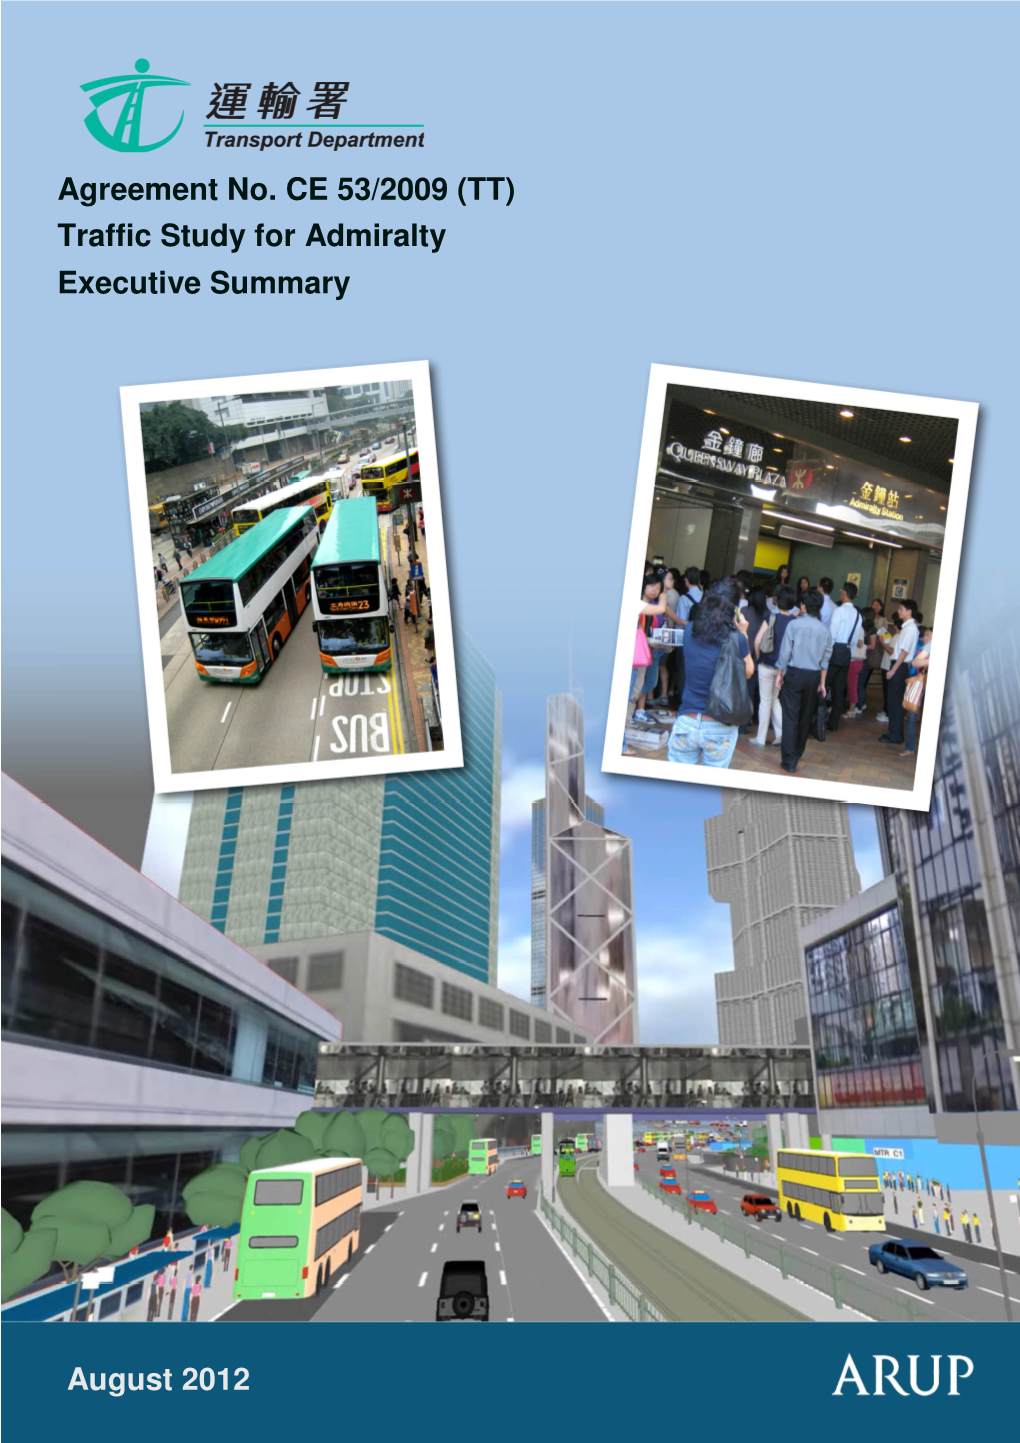 Agreement No. CE 53/2009 (TT) Traffic Study for Admiralty Executive